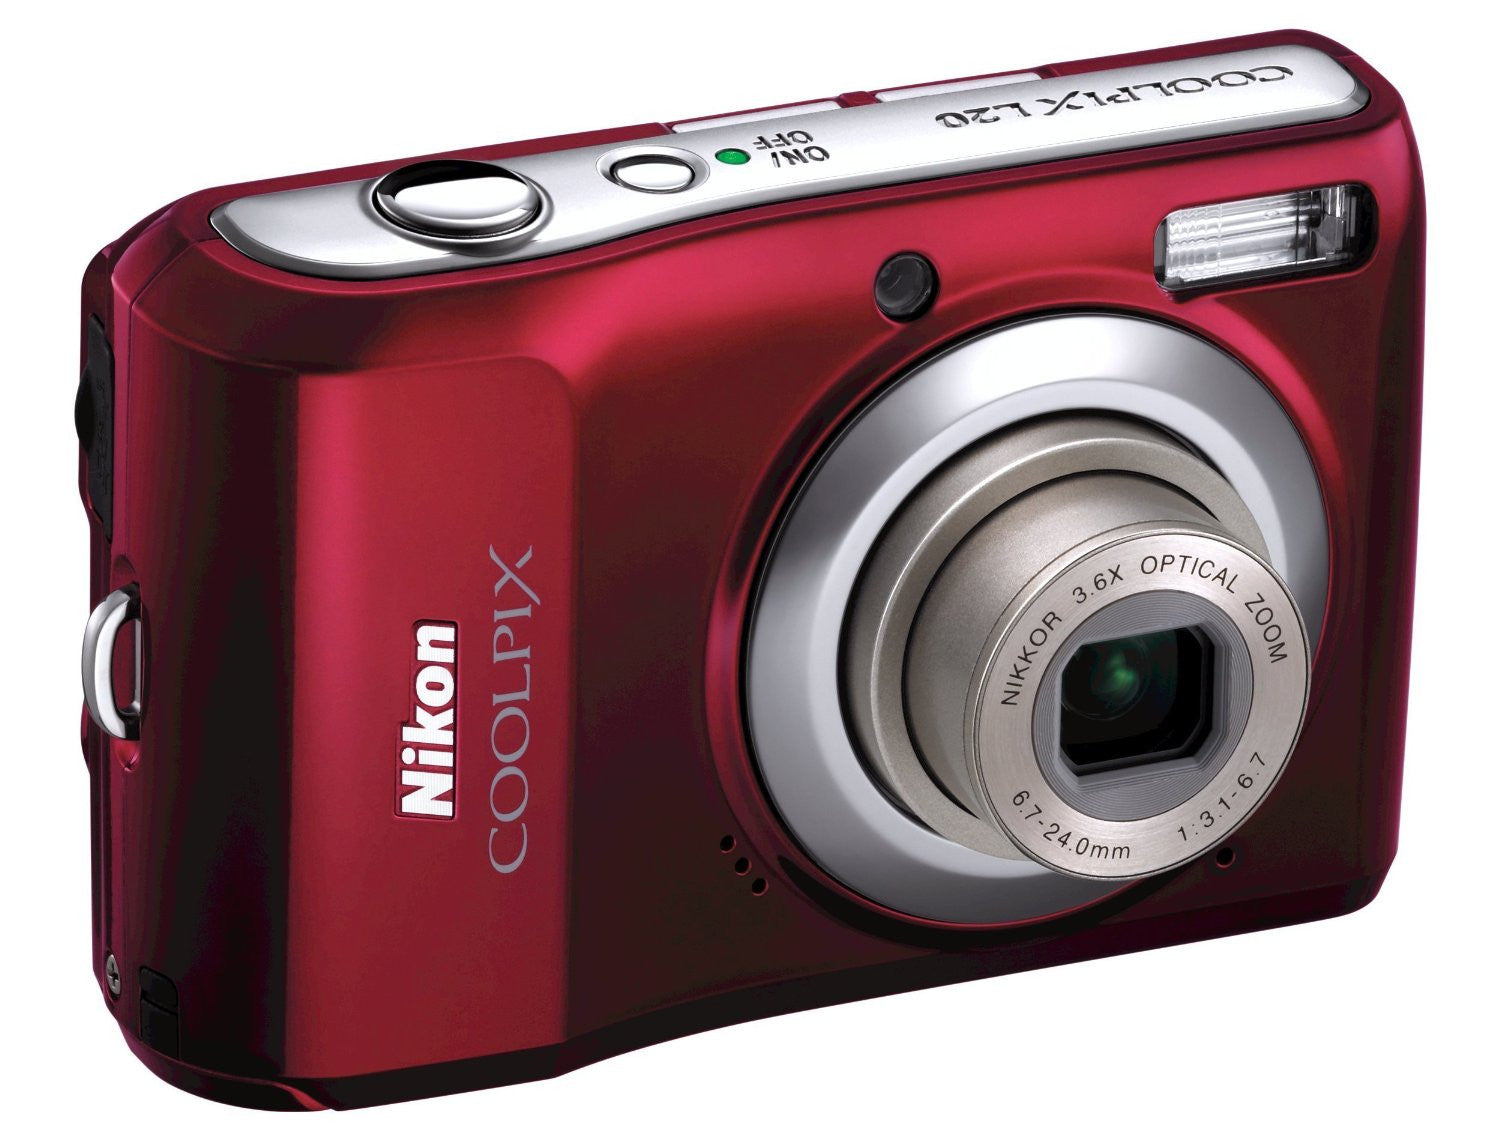 Nikon Coolpix L20 10MP Digital Camera with 3.6 Optical Zoom and 3 inch LCD, (Deep Red) - worldtradesolution.com
 - 4